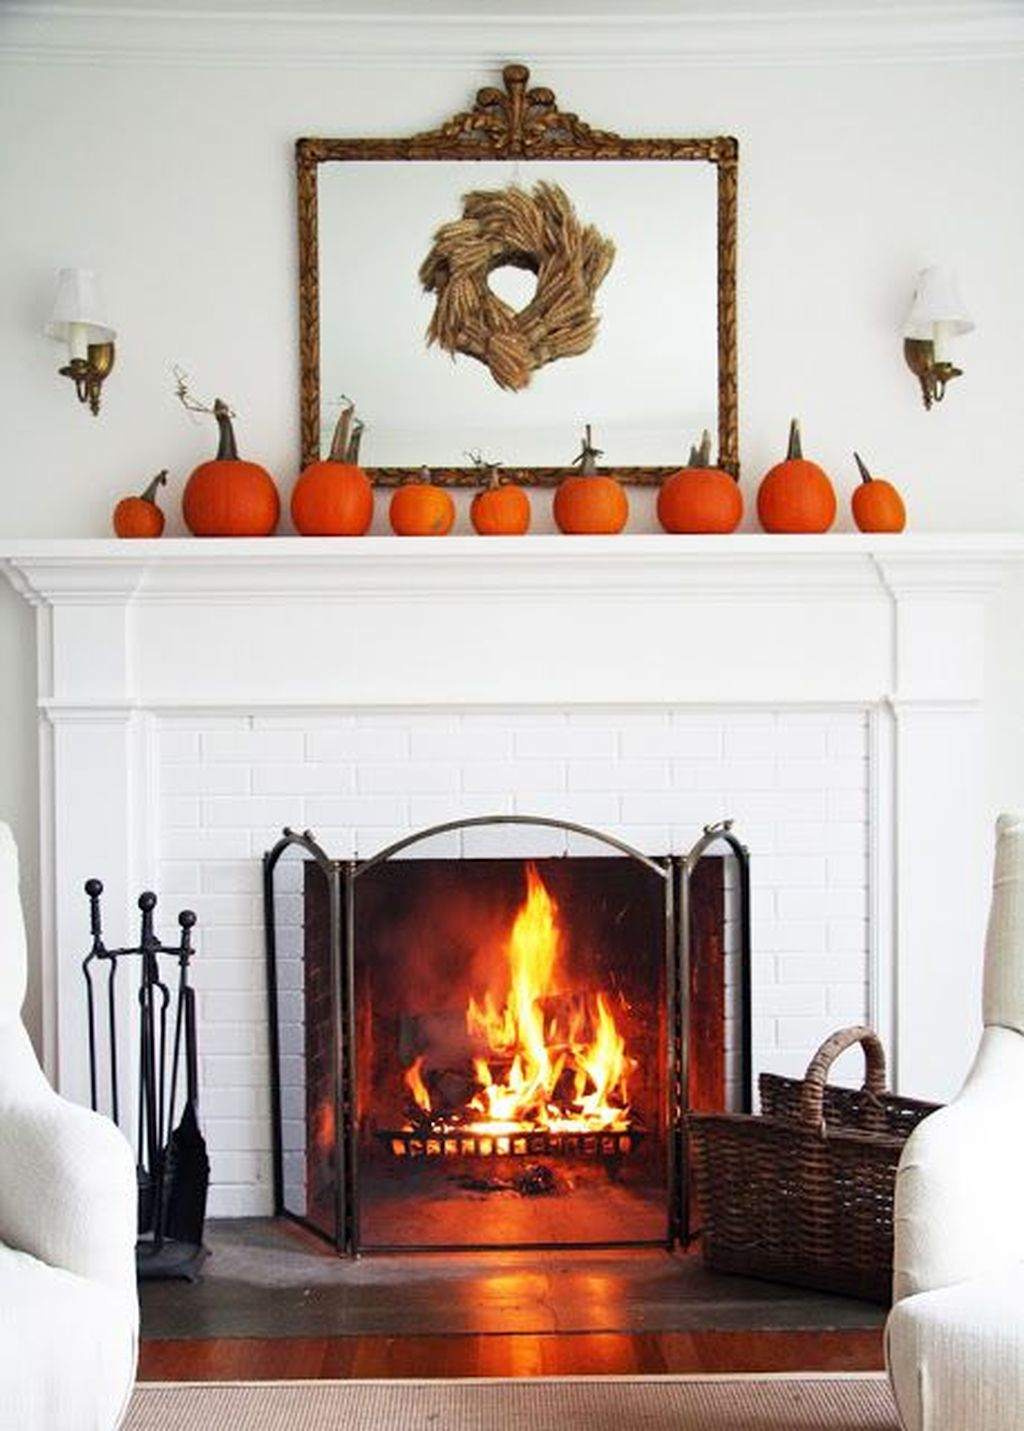 Fabulous Interior Design Ideas For Fall And Winter To Try Now09